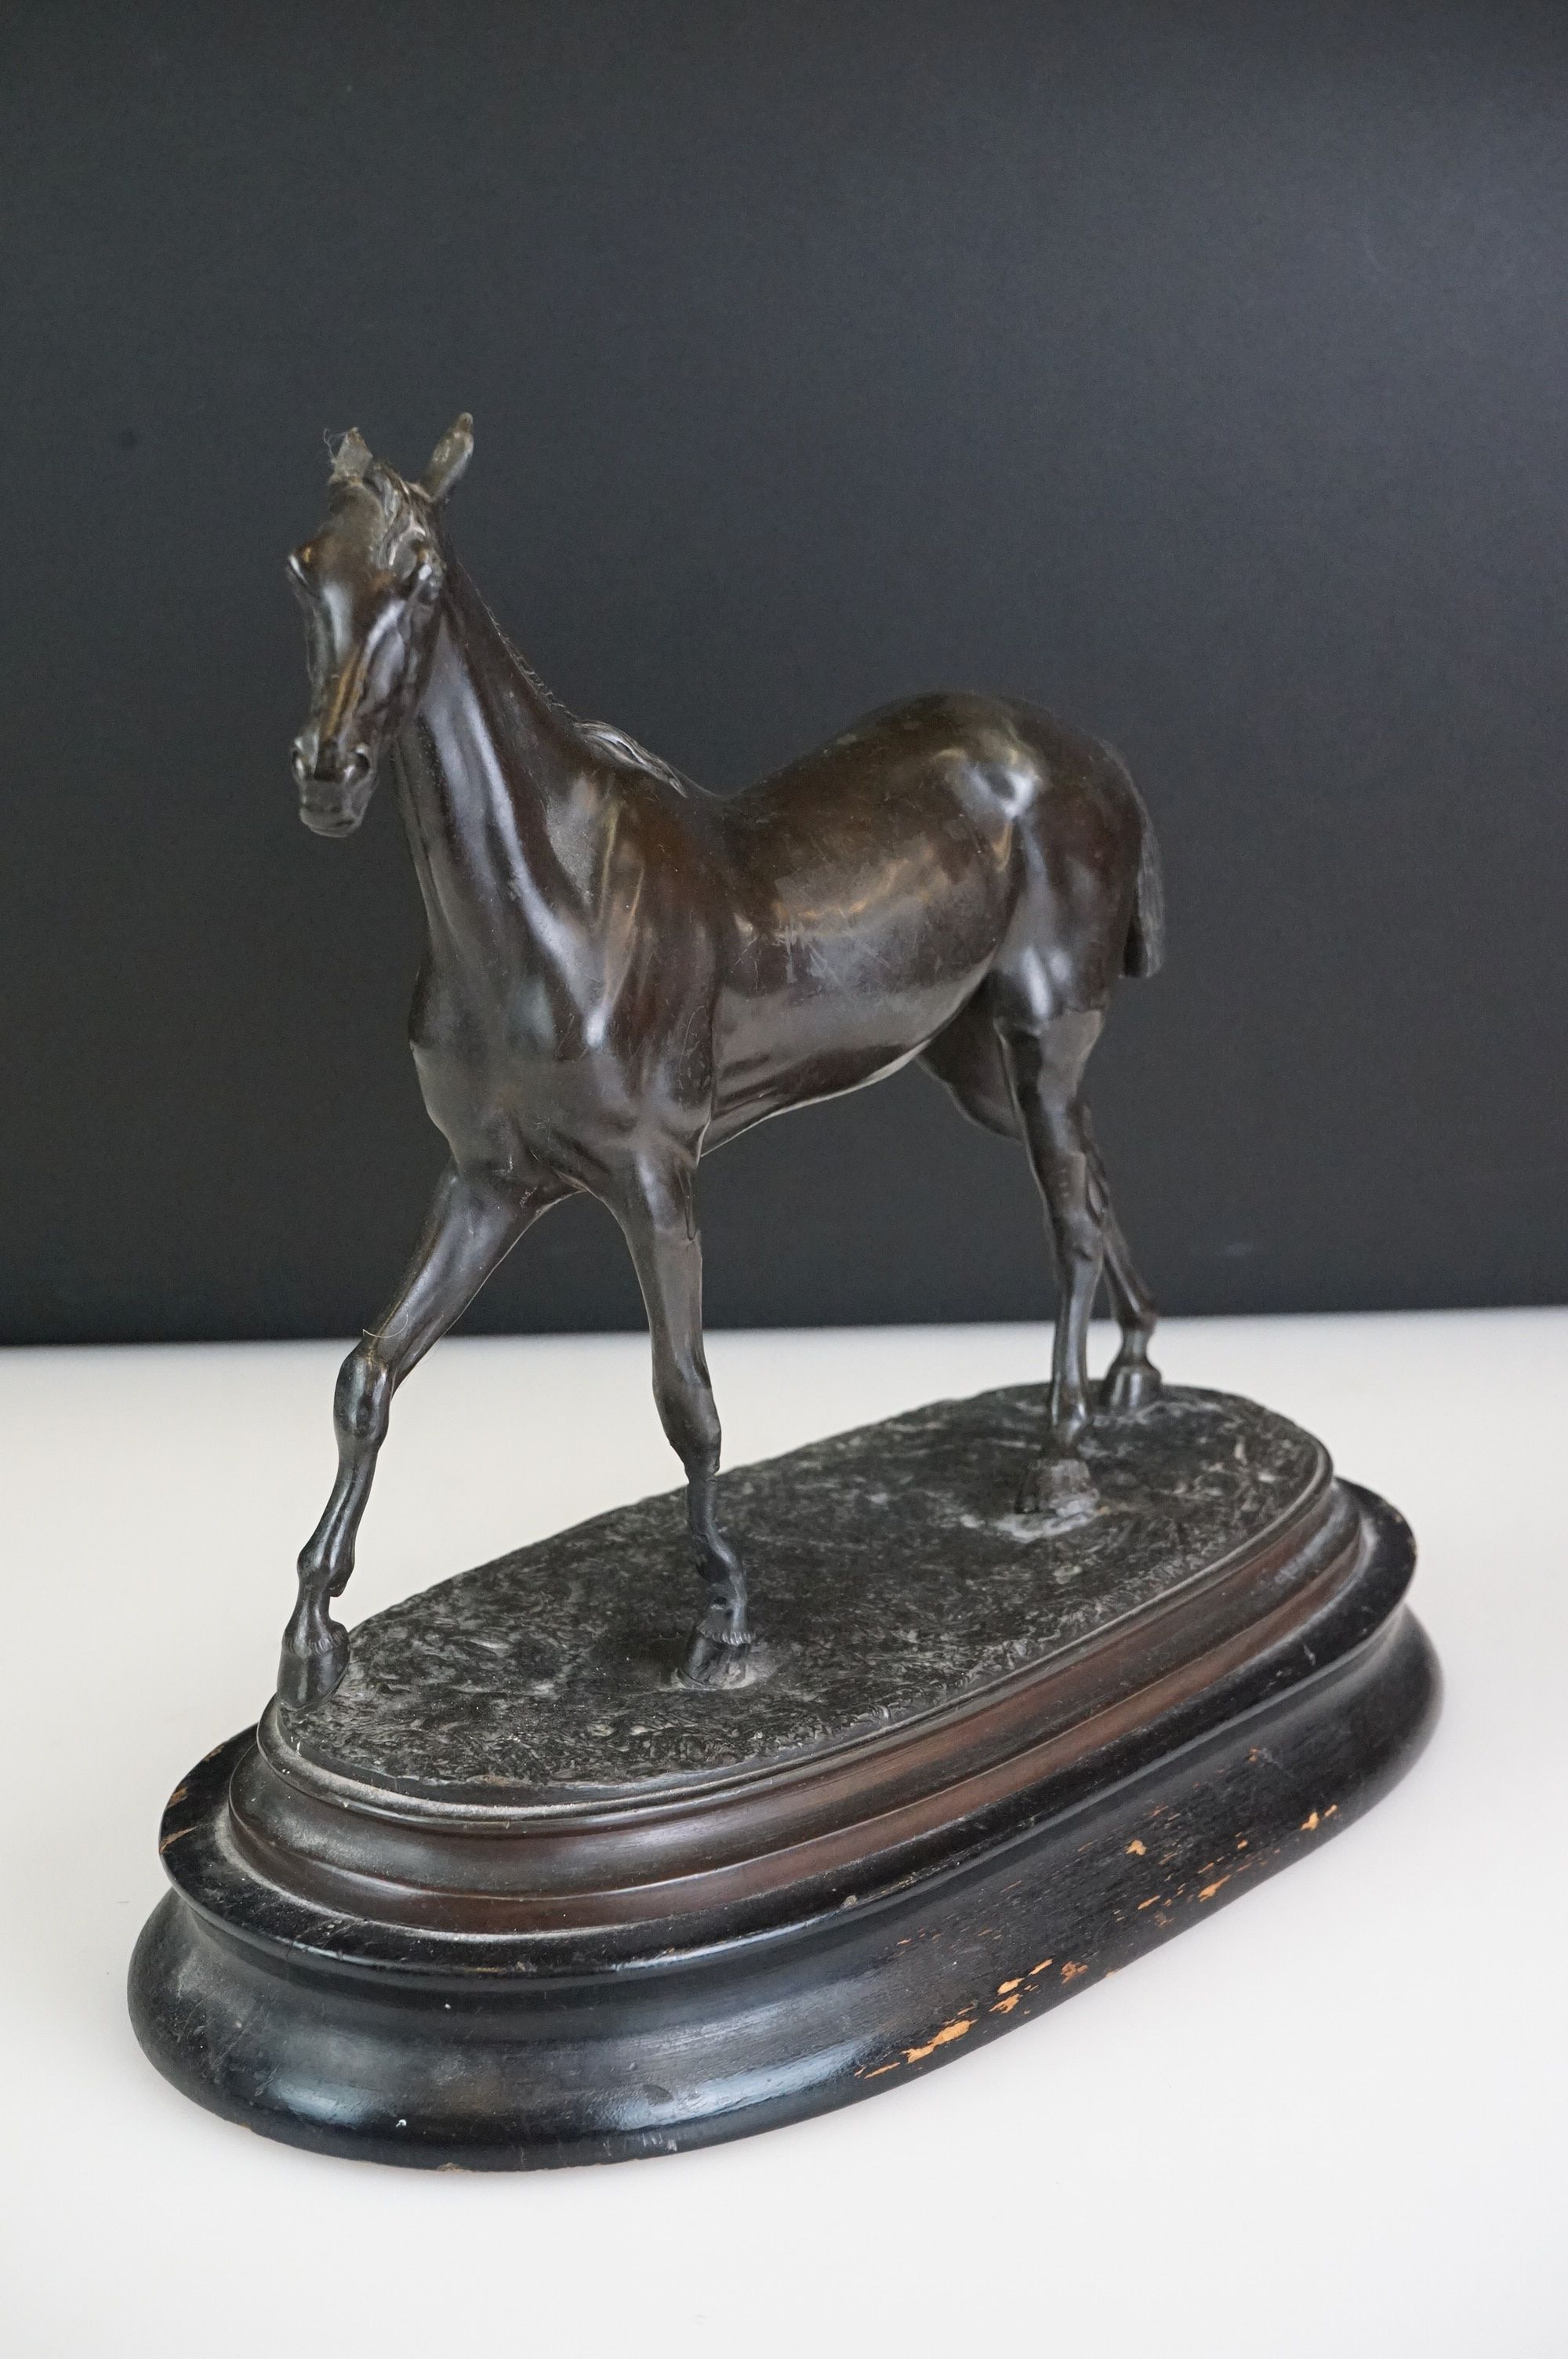 Spelter figure of a horse mid-stride, mounted on a wooden base, approx 27cm high - Image 2 of 5